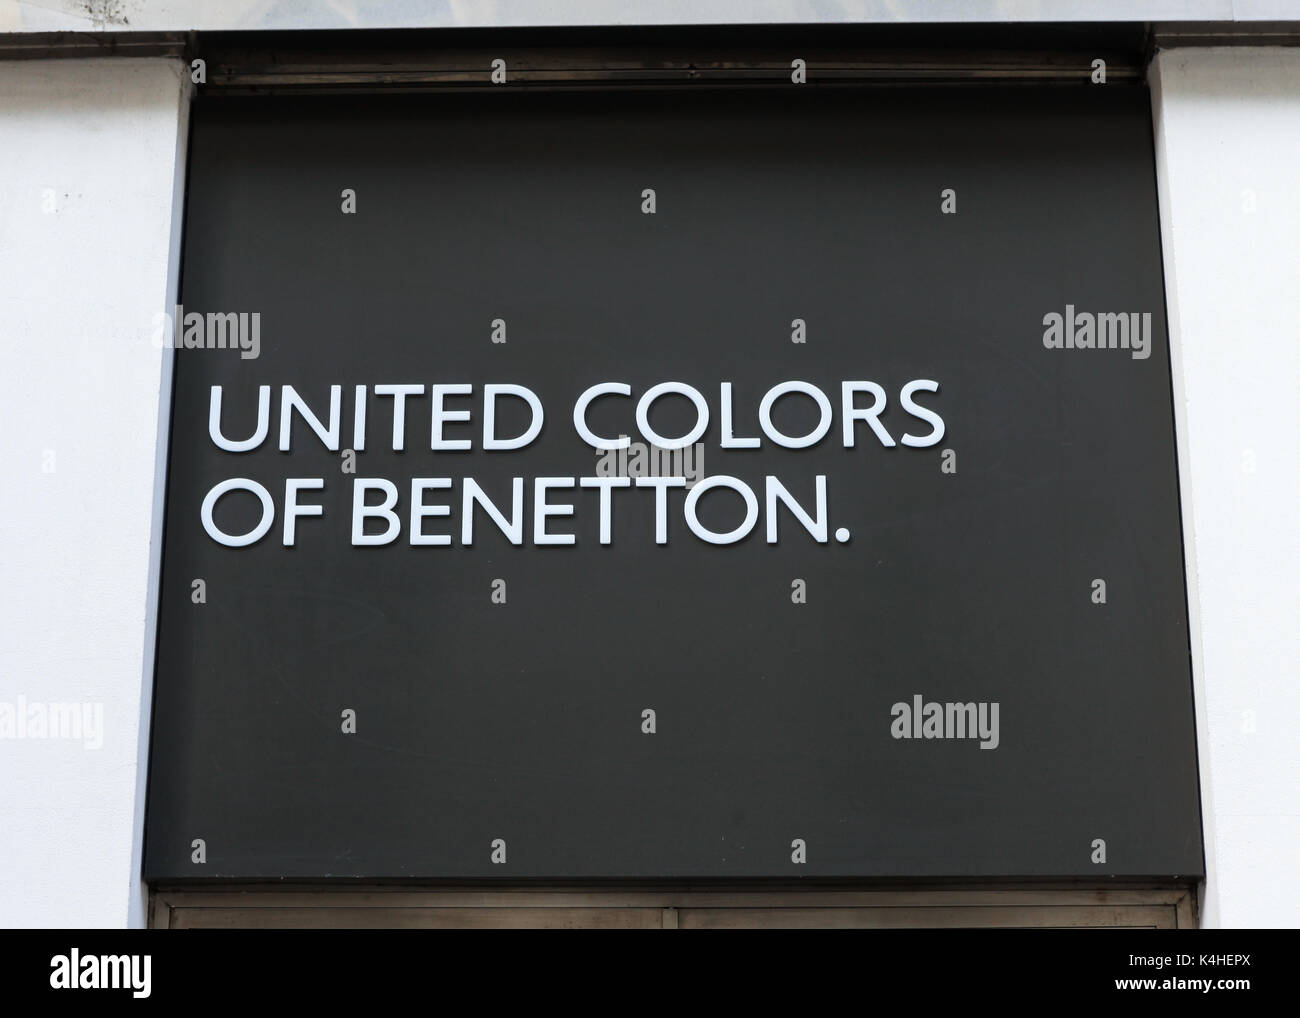 benetton, color, beneton, colors, united, sign, fashion, brand, store, shop, editorial, clothing, company, white, designer, netherlands, outlet, roerm Stock Photo